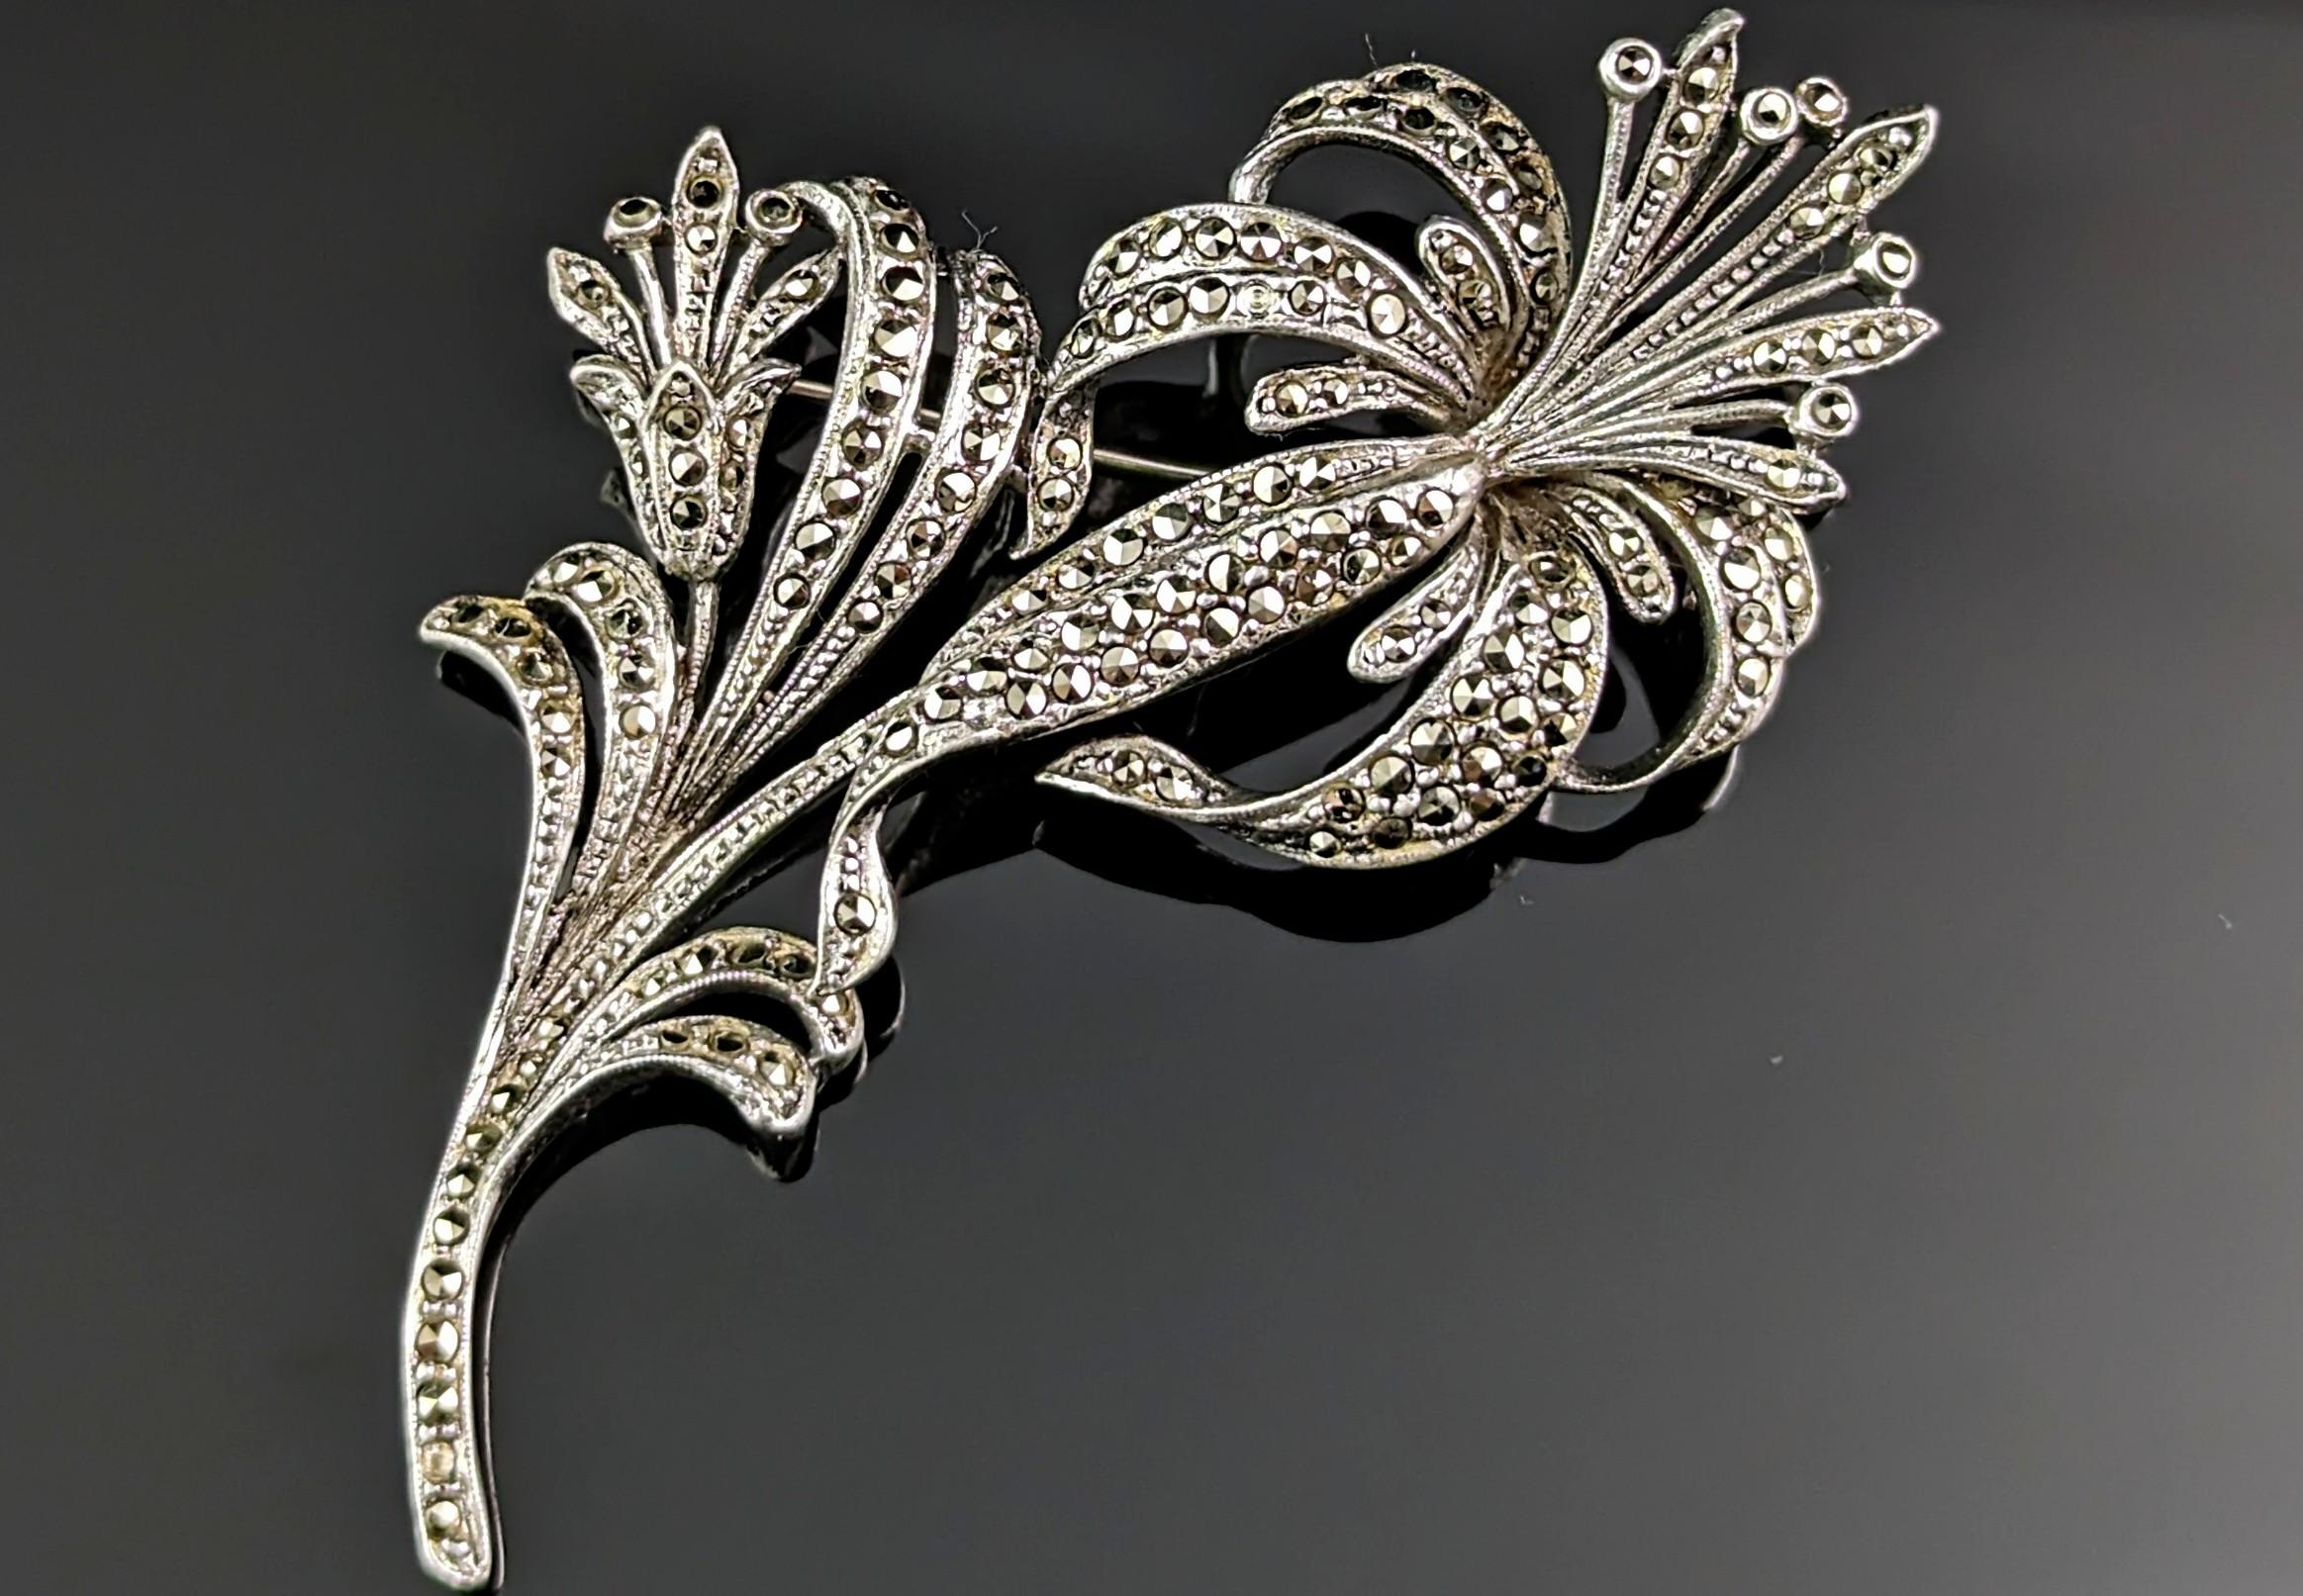 This vintage sterling silver and marcasite flower brooch is a truly beautiful piece.

It is a large sized brooch that could be worn in many ways and the marcasite gives just the right amount of sparkle and shimmer.

The brooch is designed as a large